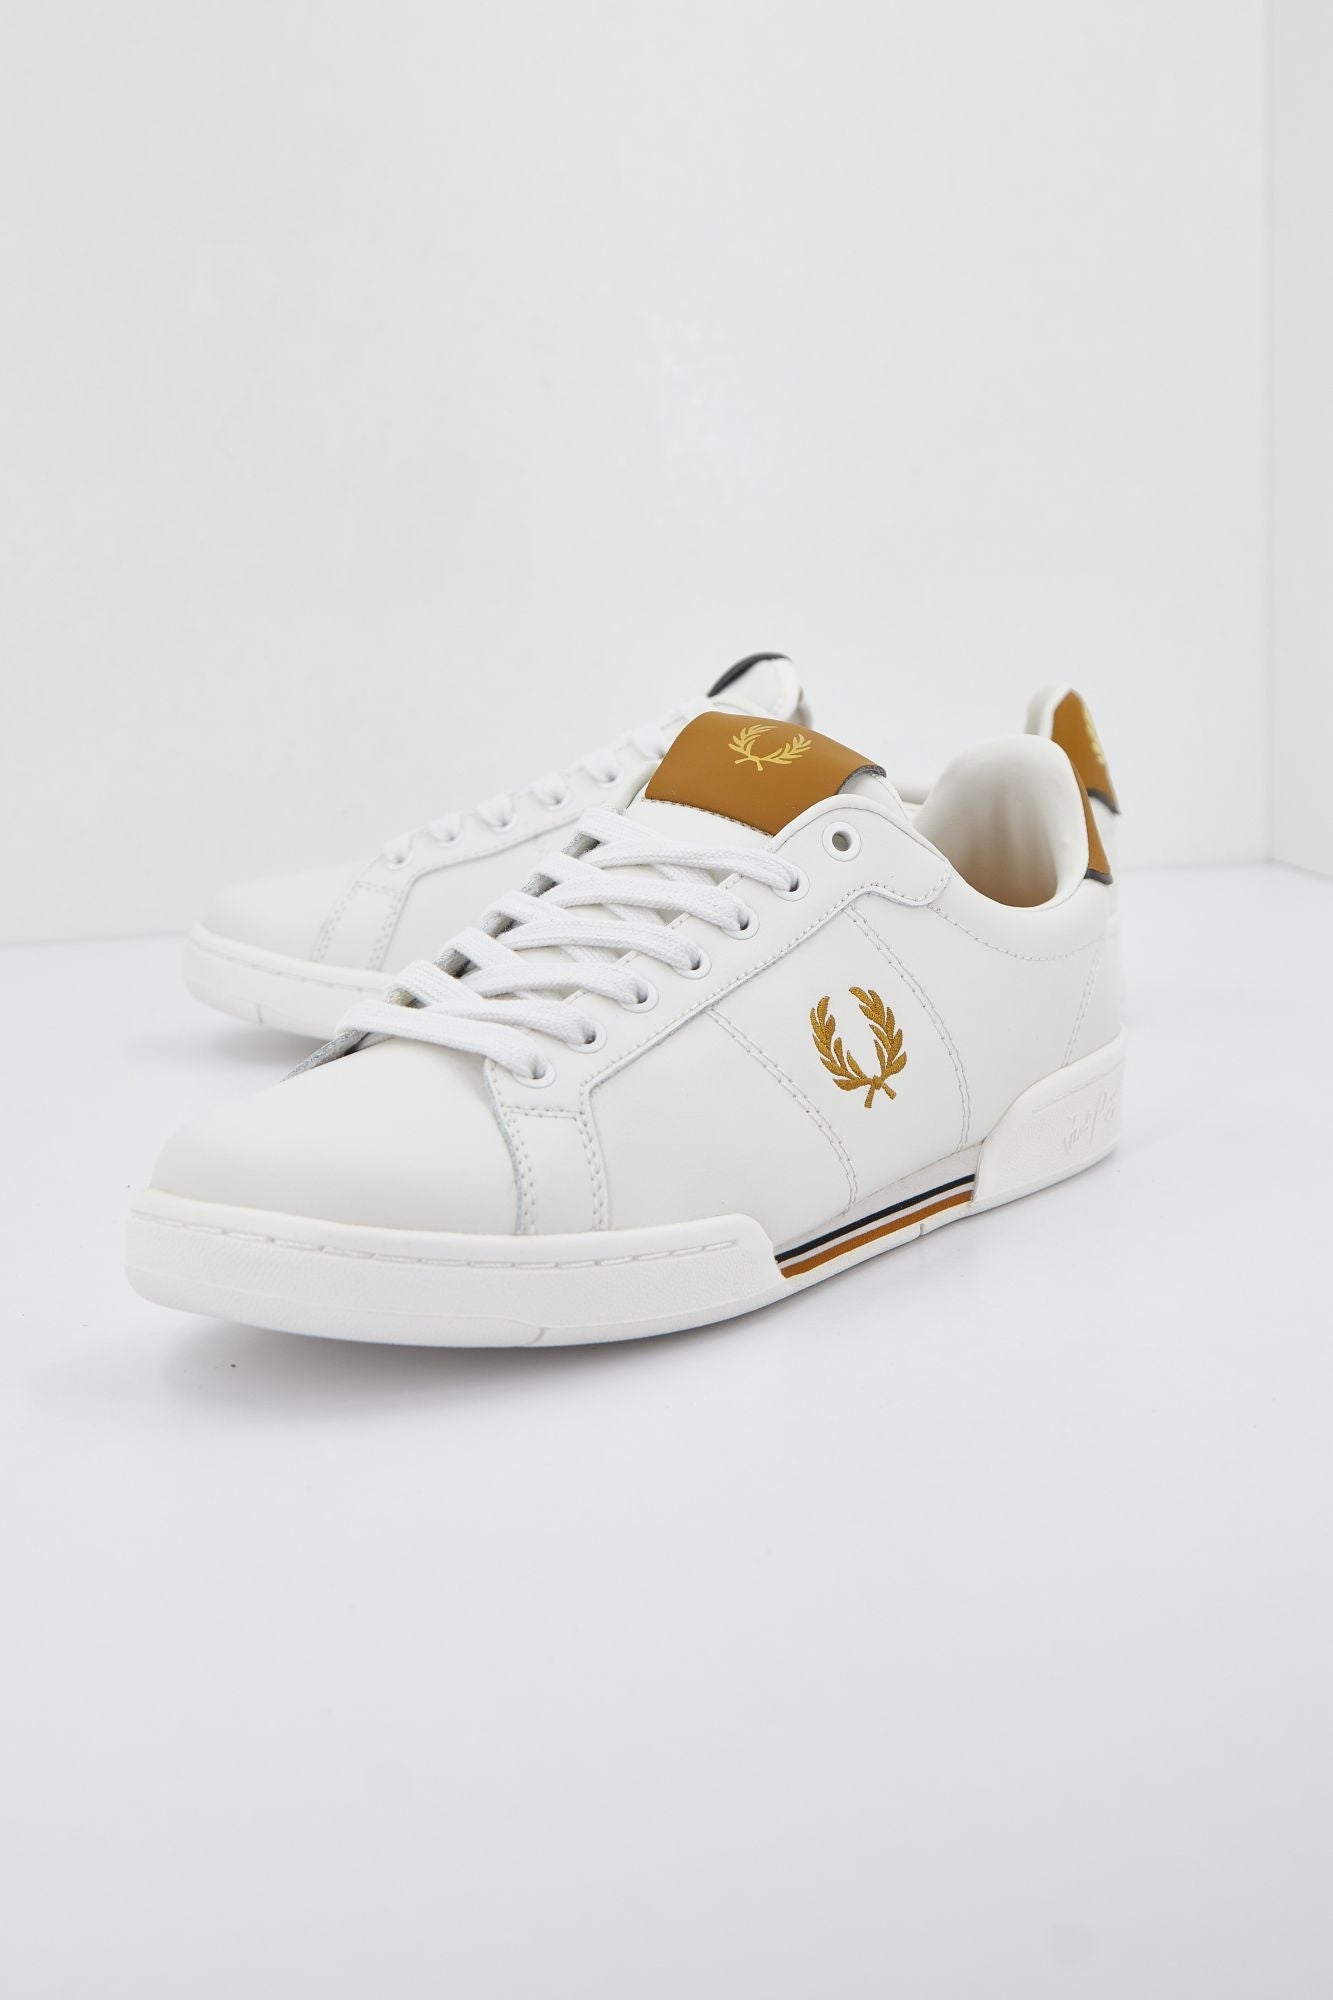 FRED PERRY B722 LEATHER en color BLANCO (1)